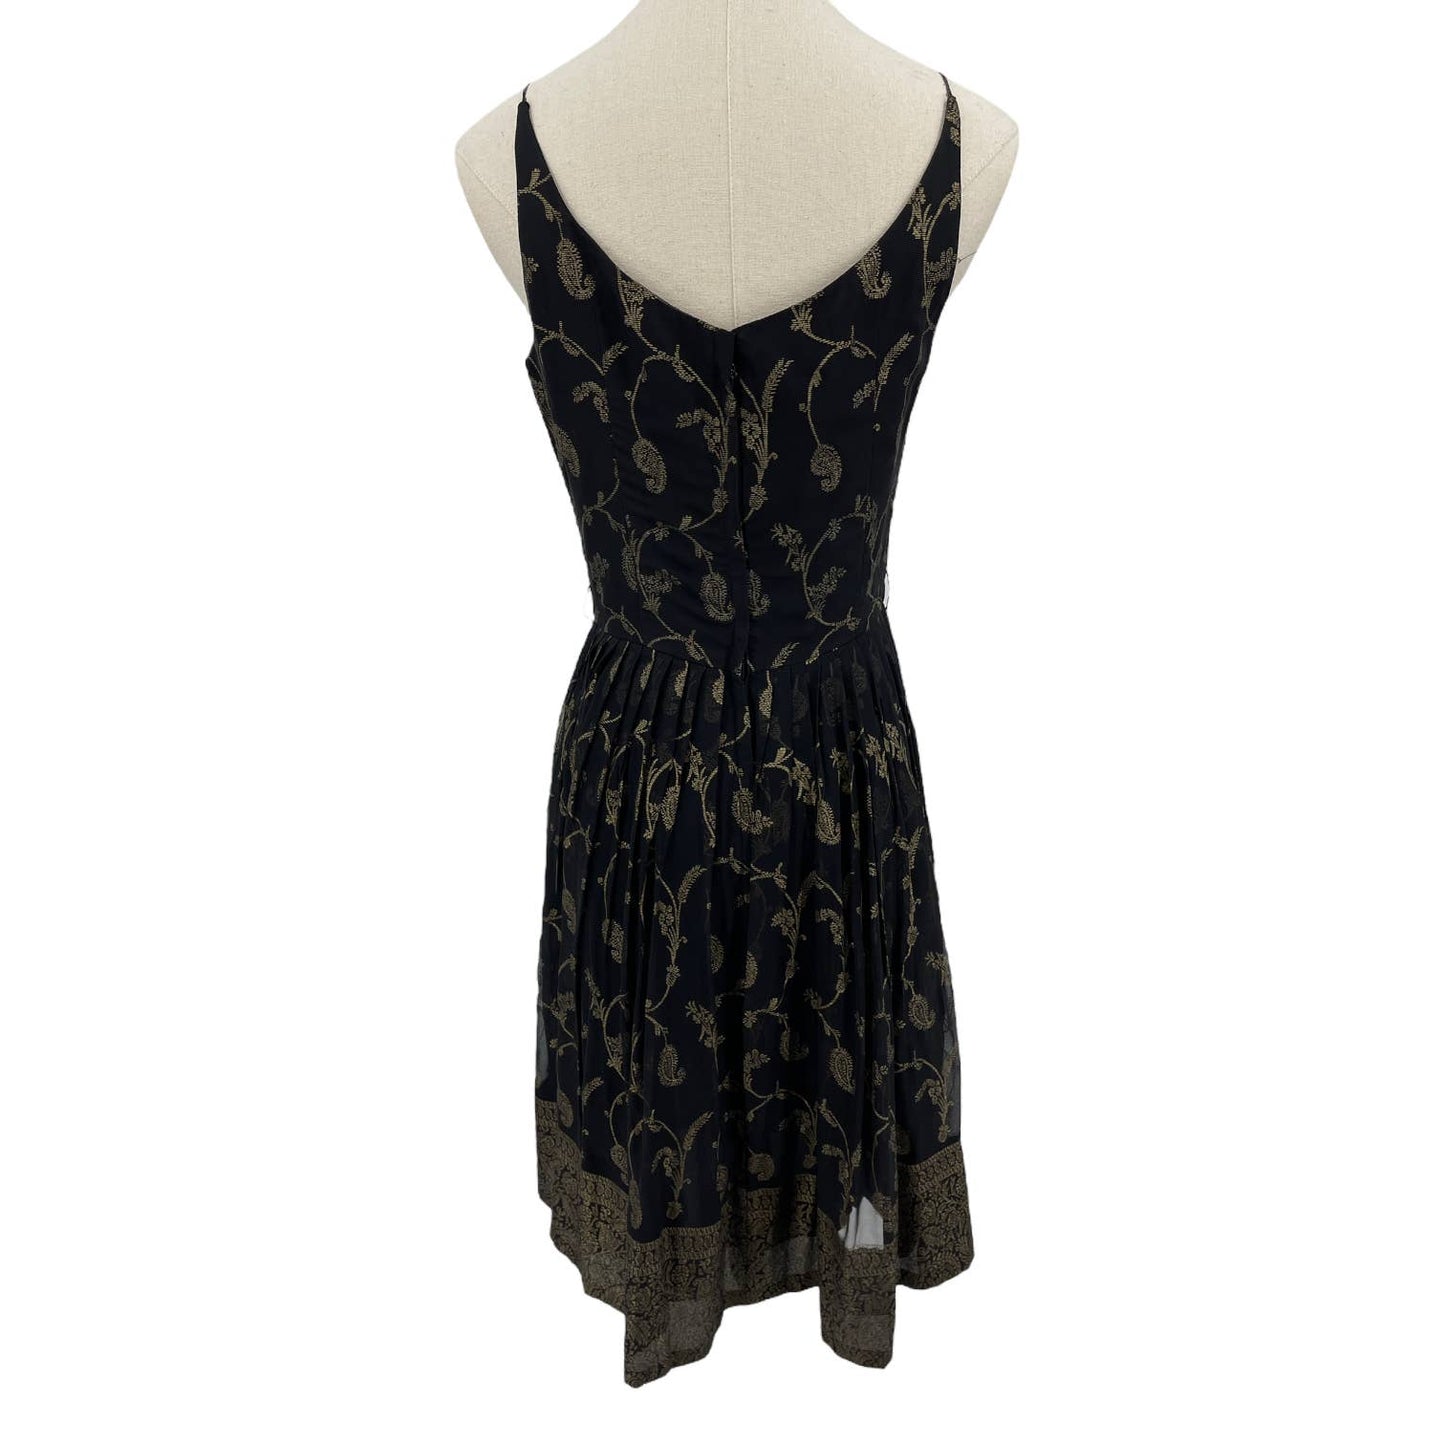 Vintage 50s Black and gold Silk Fit and Flare Sleeveless Dress Border Print Size XS